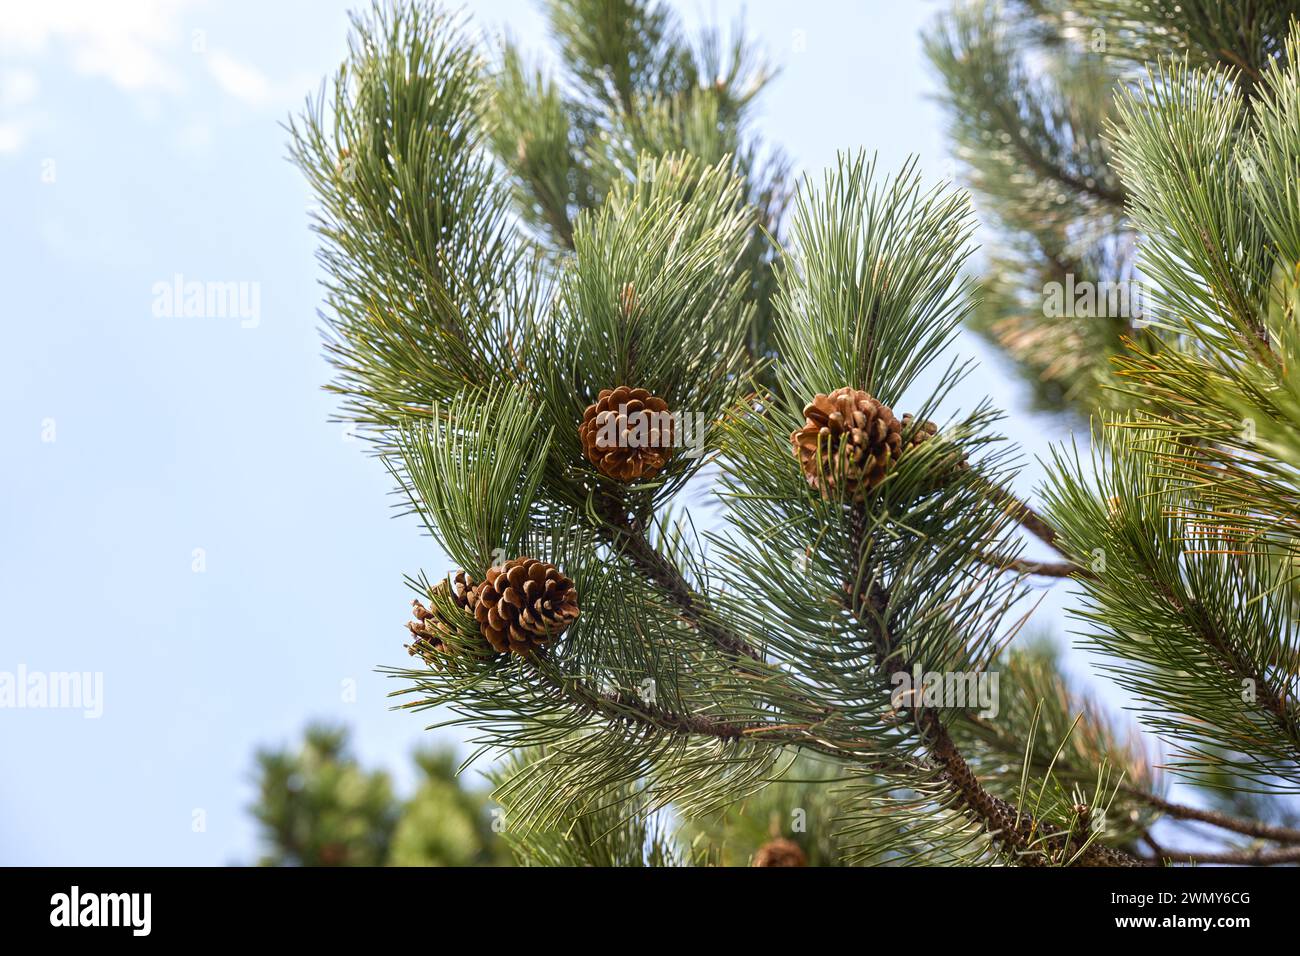 Pine branch with cones on a background of blue sky Stock Photo